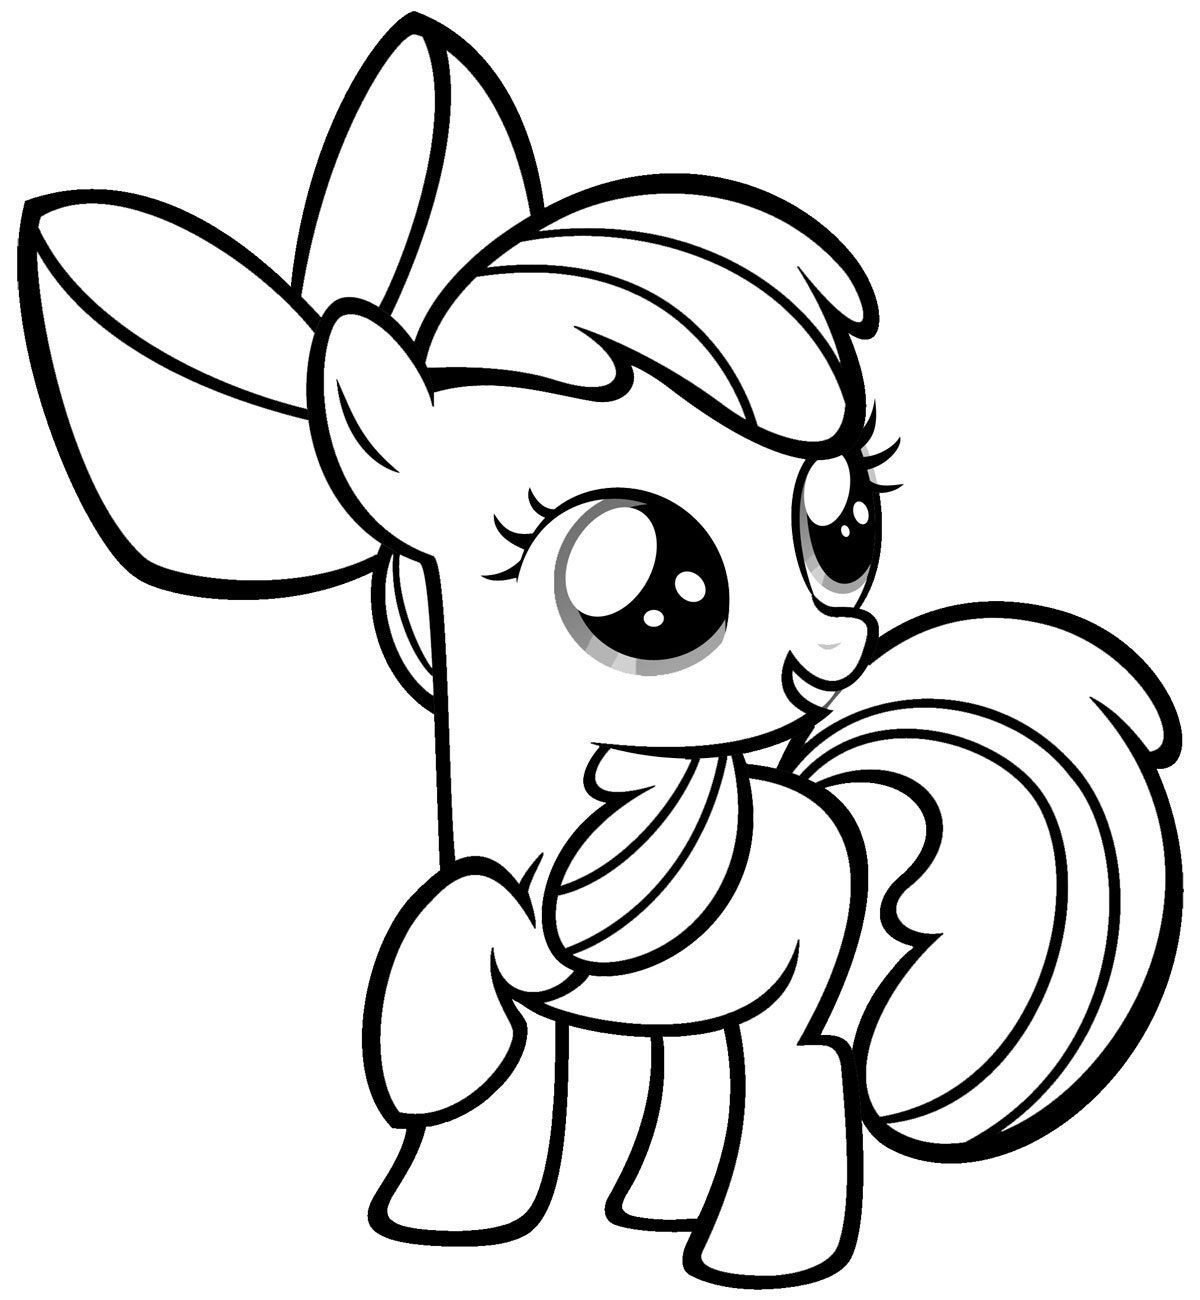 Baby My Little Pony Coloring Pages
 Free Printable My Little Pony Coloring Pages For Kids